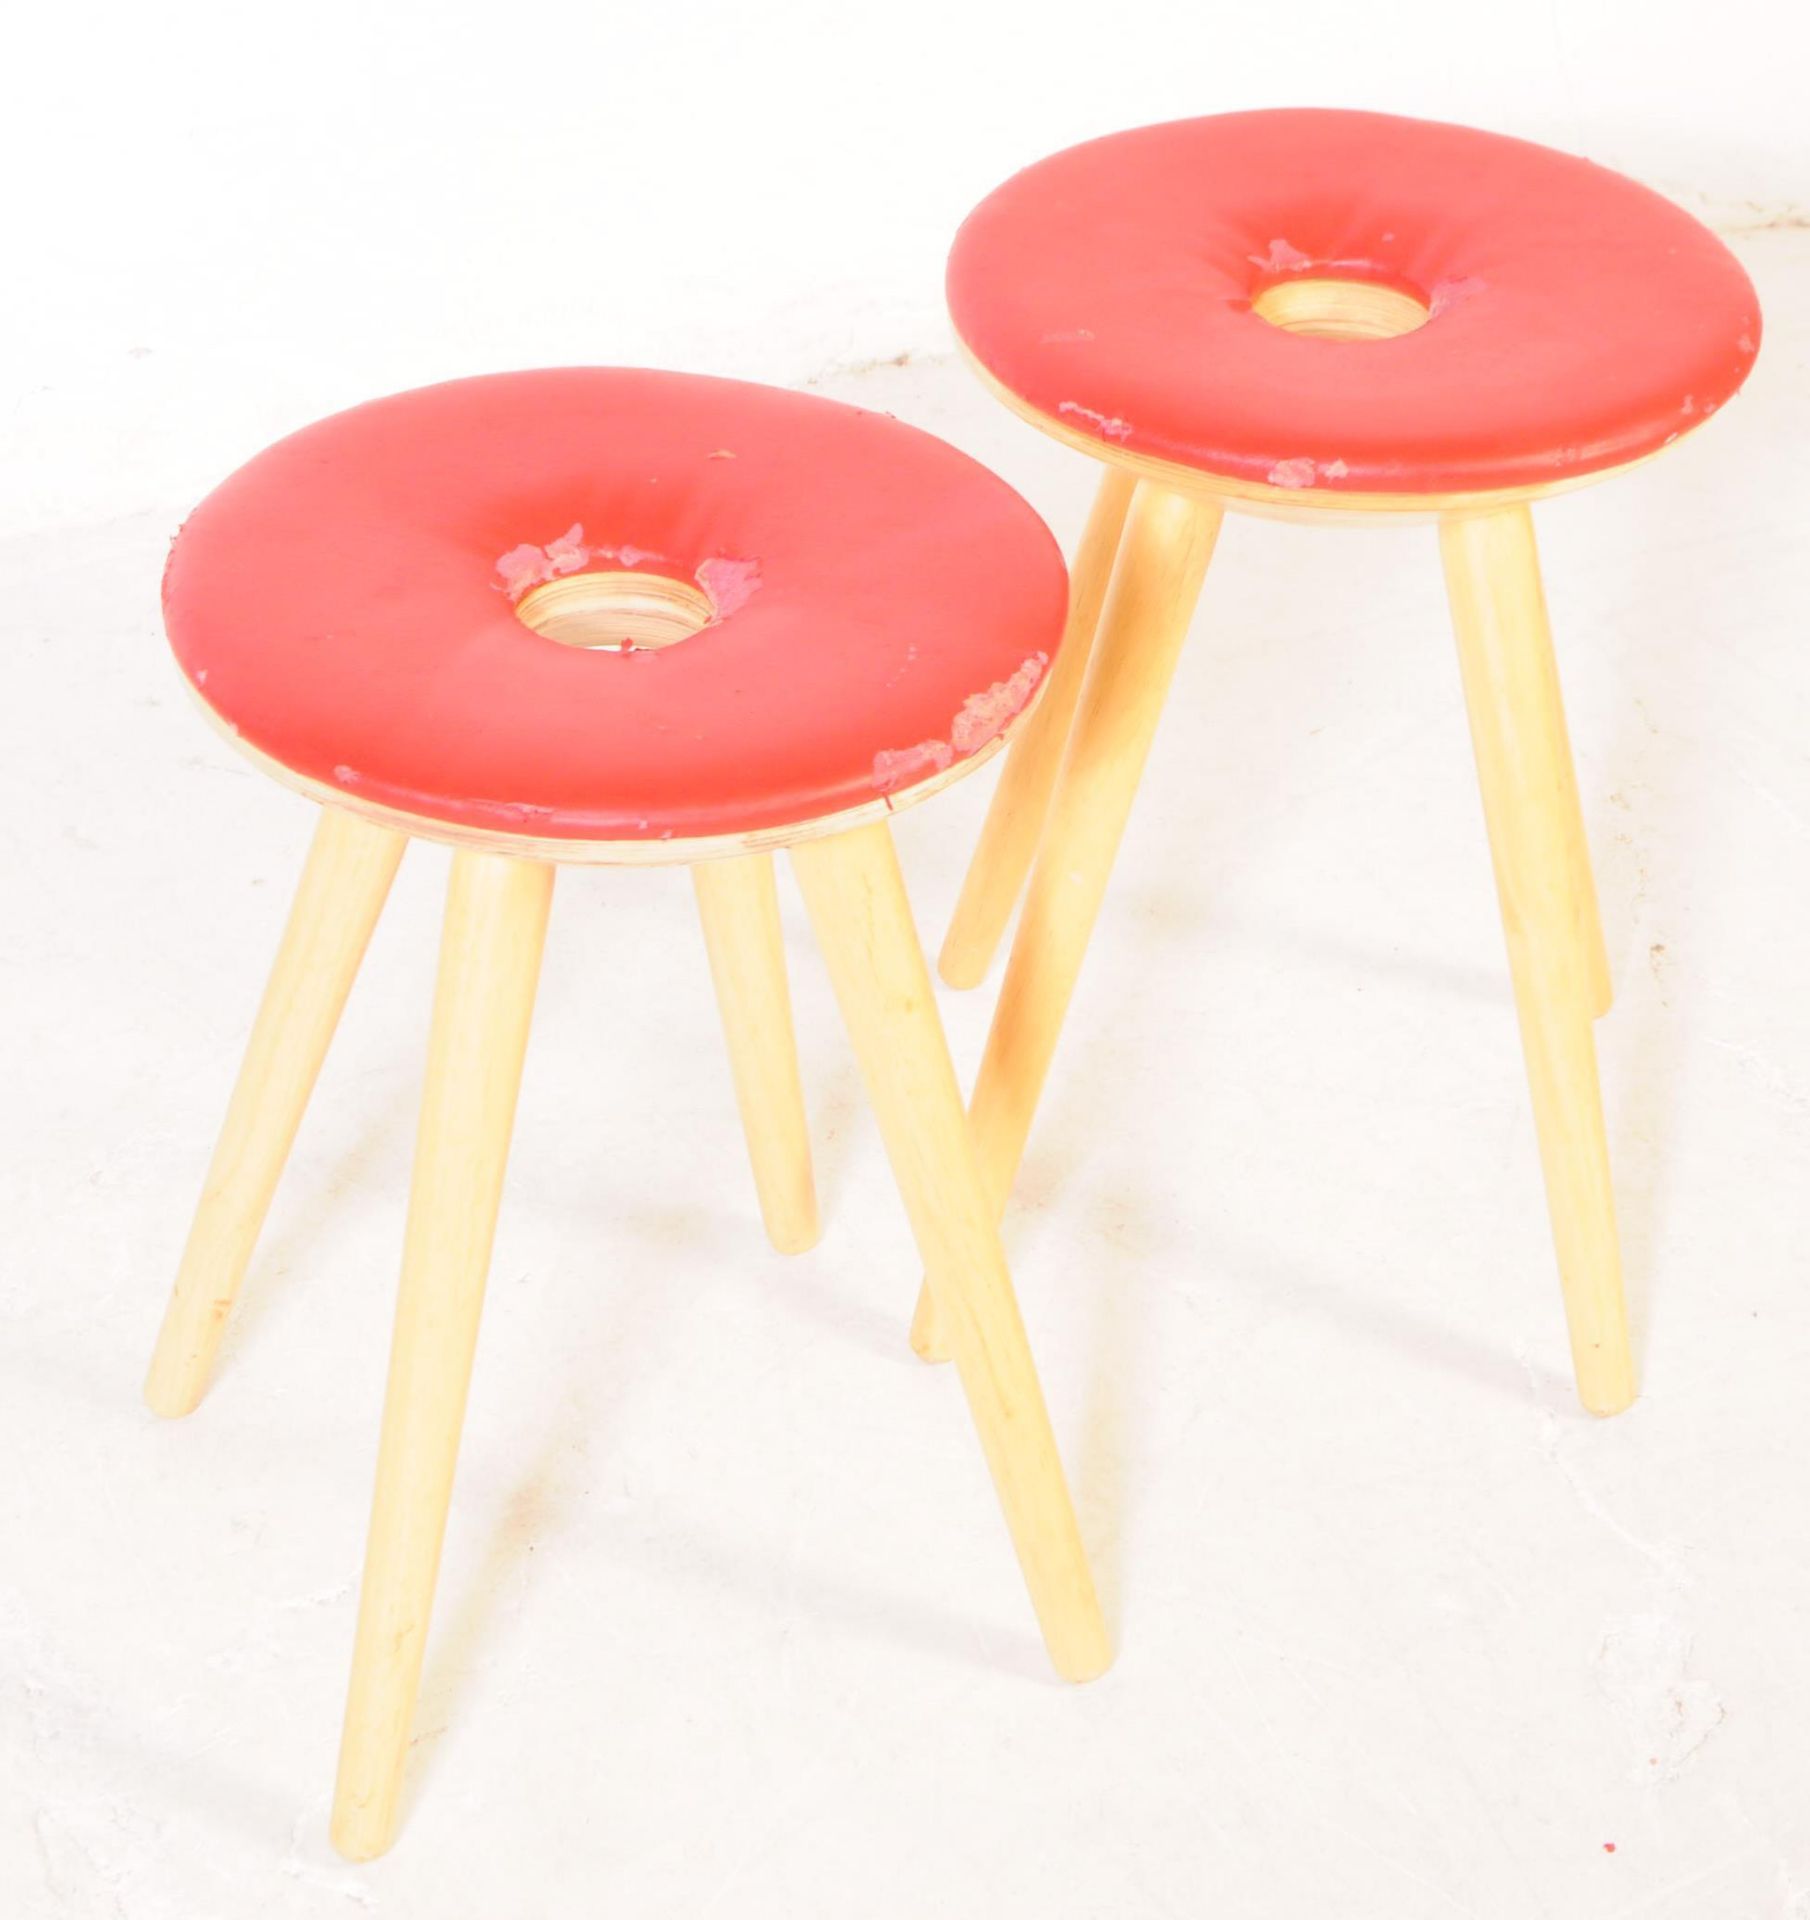 PAIR OF MID CENTURY VINYL TOPPED STOOLS - Image 3 of 6